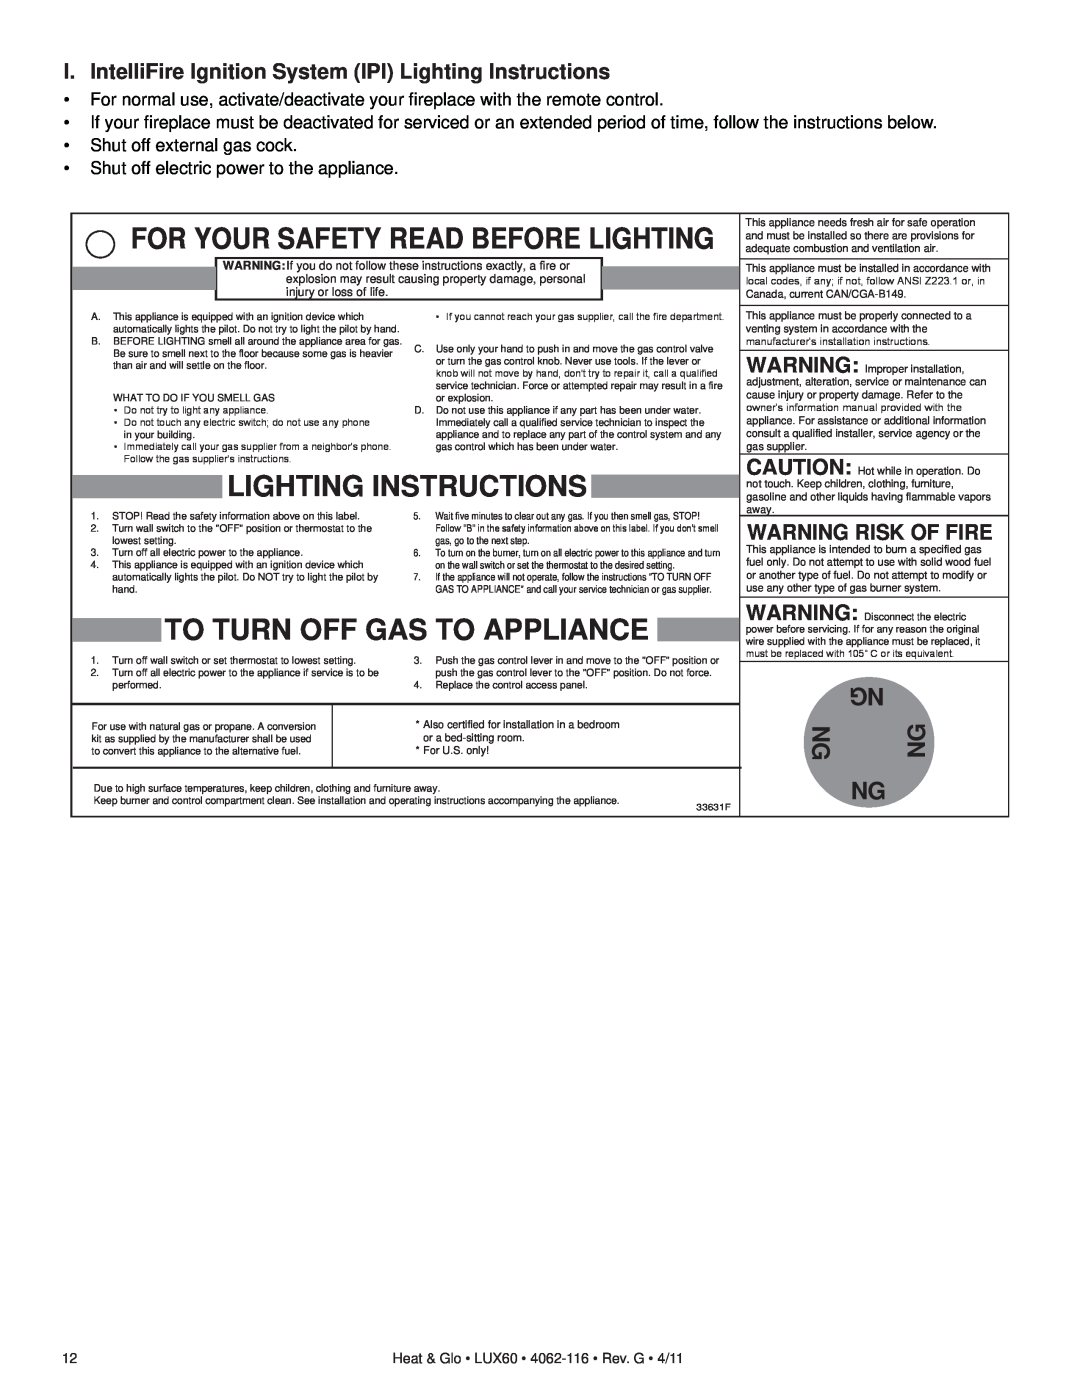 Heat & Glo LifeStyle LUX60 Warning Risk Of Fire, To Turn Off Gas To Appliance, For Your Safety Read Before Lighting 